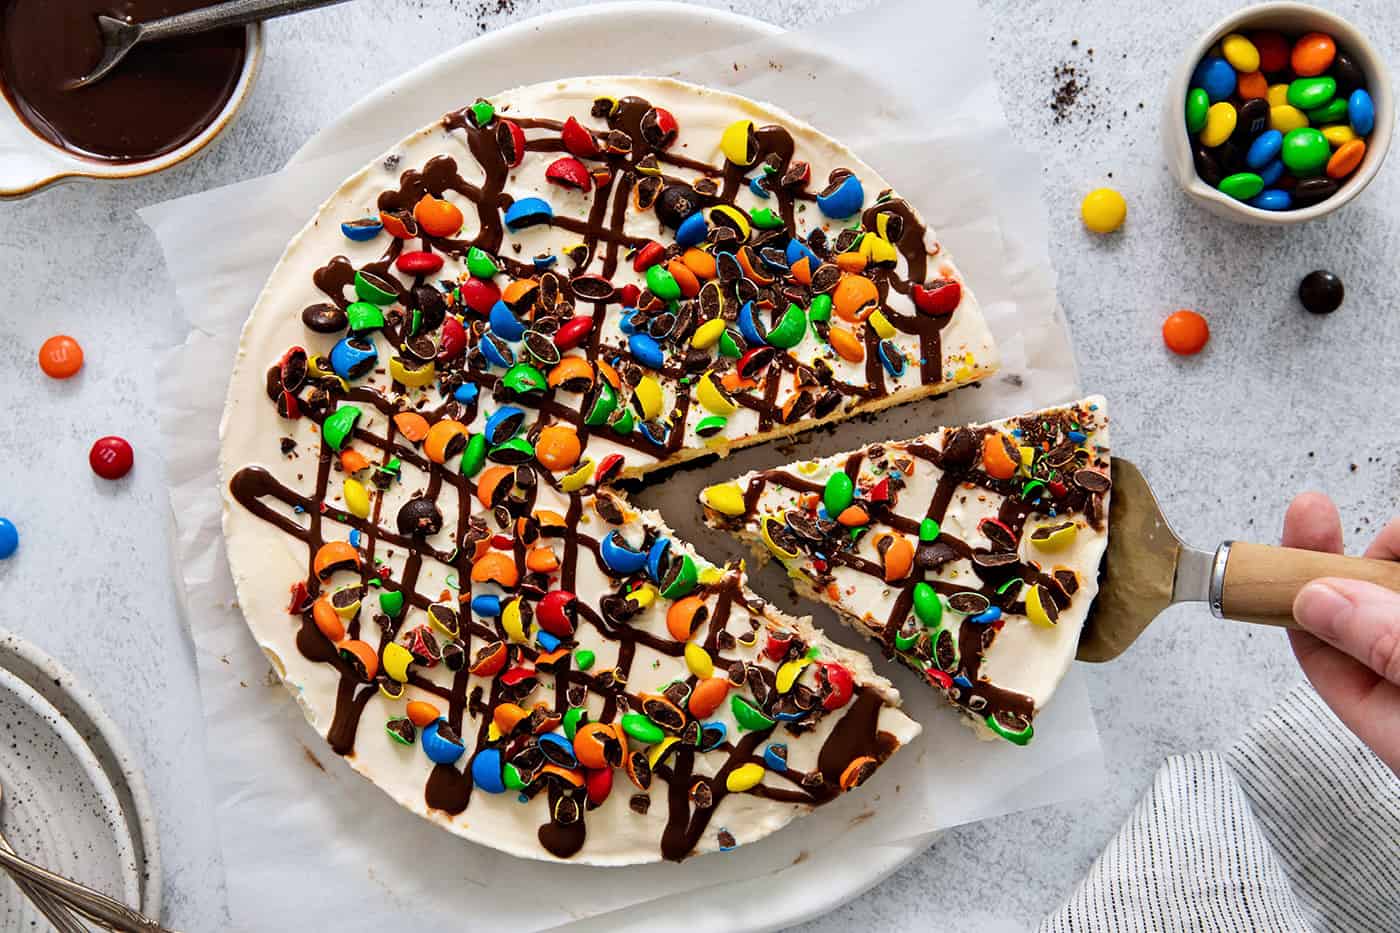 A slice of ice cream pizza being served